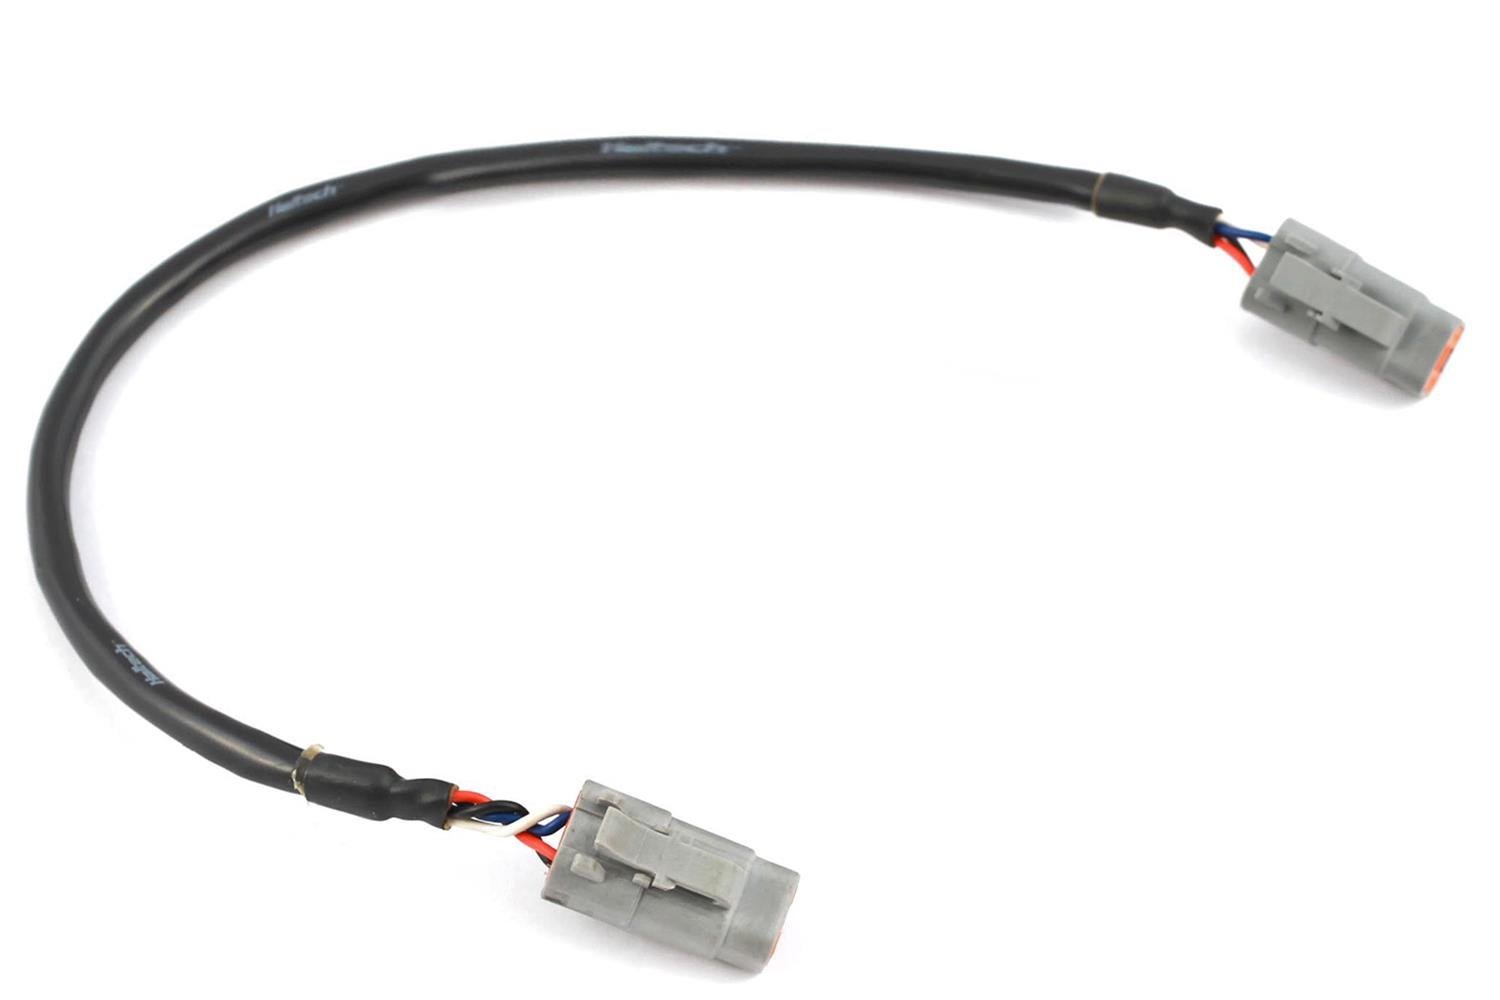 HT-130023 Elite CAN Cable, DTM-4 to DTM-4, 600 mm (24 in.)